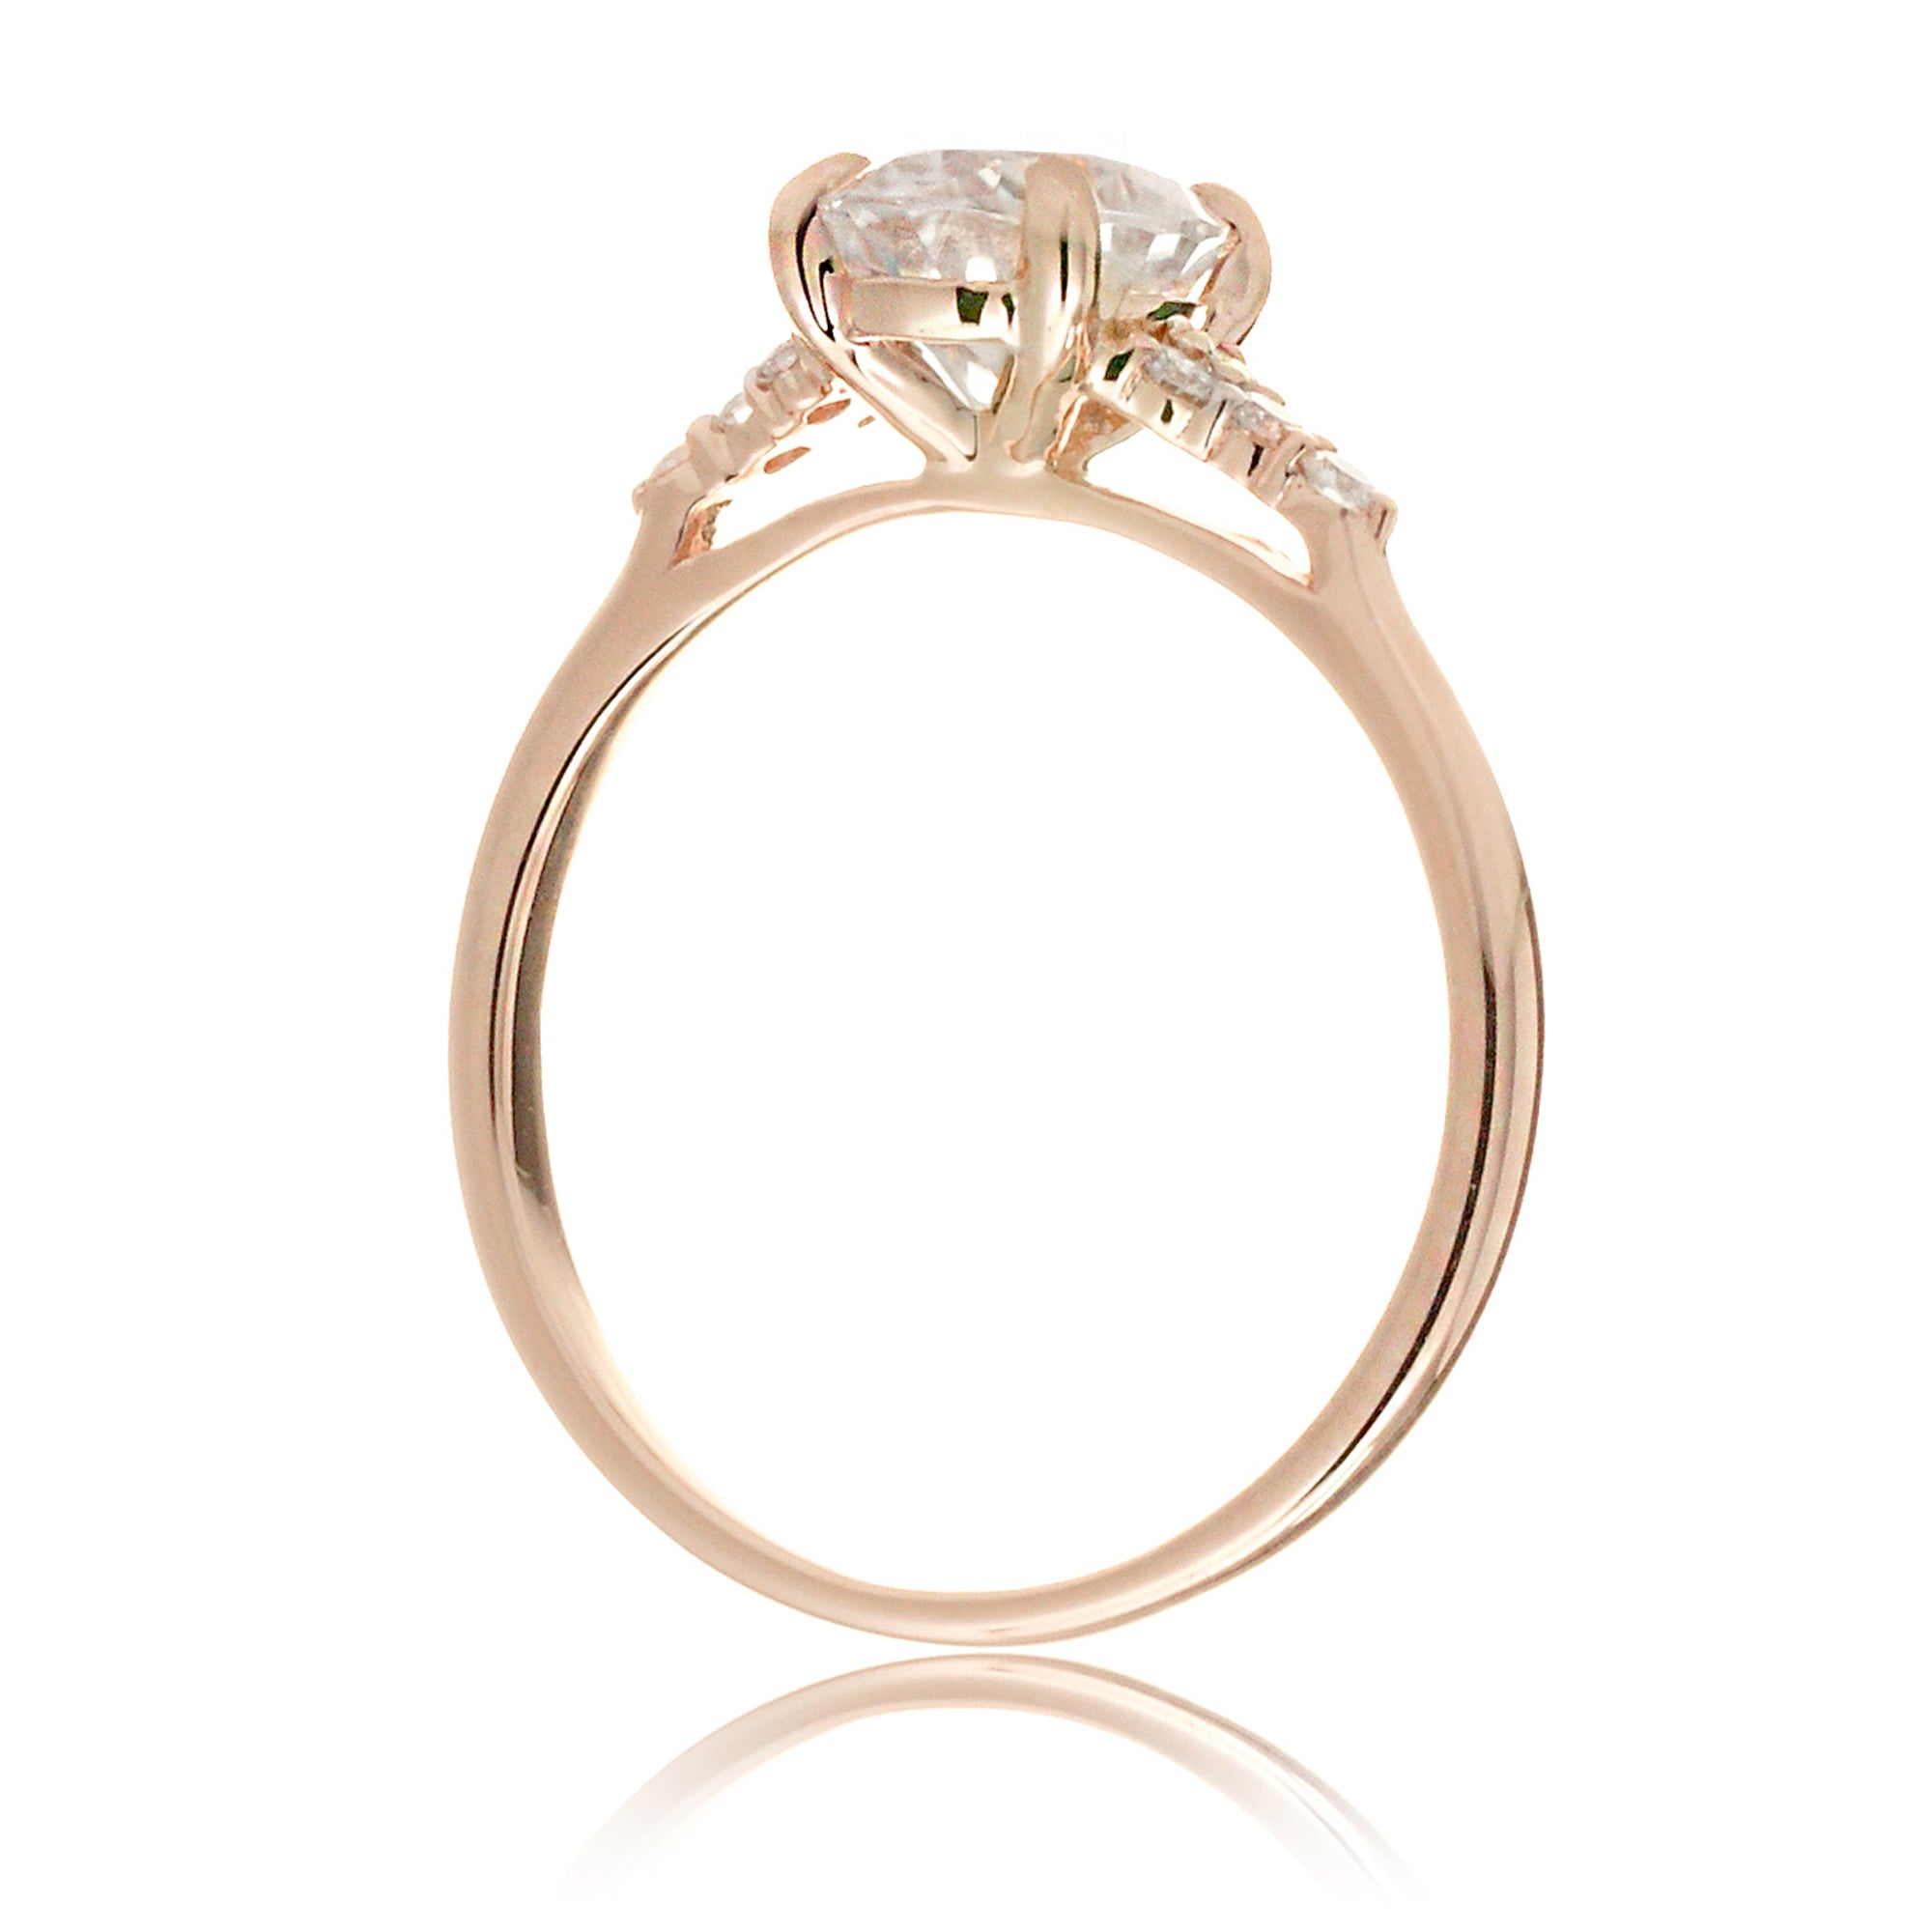 Pear shape diamond engagement ring in rose gold - the Chloe